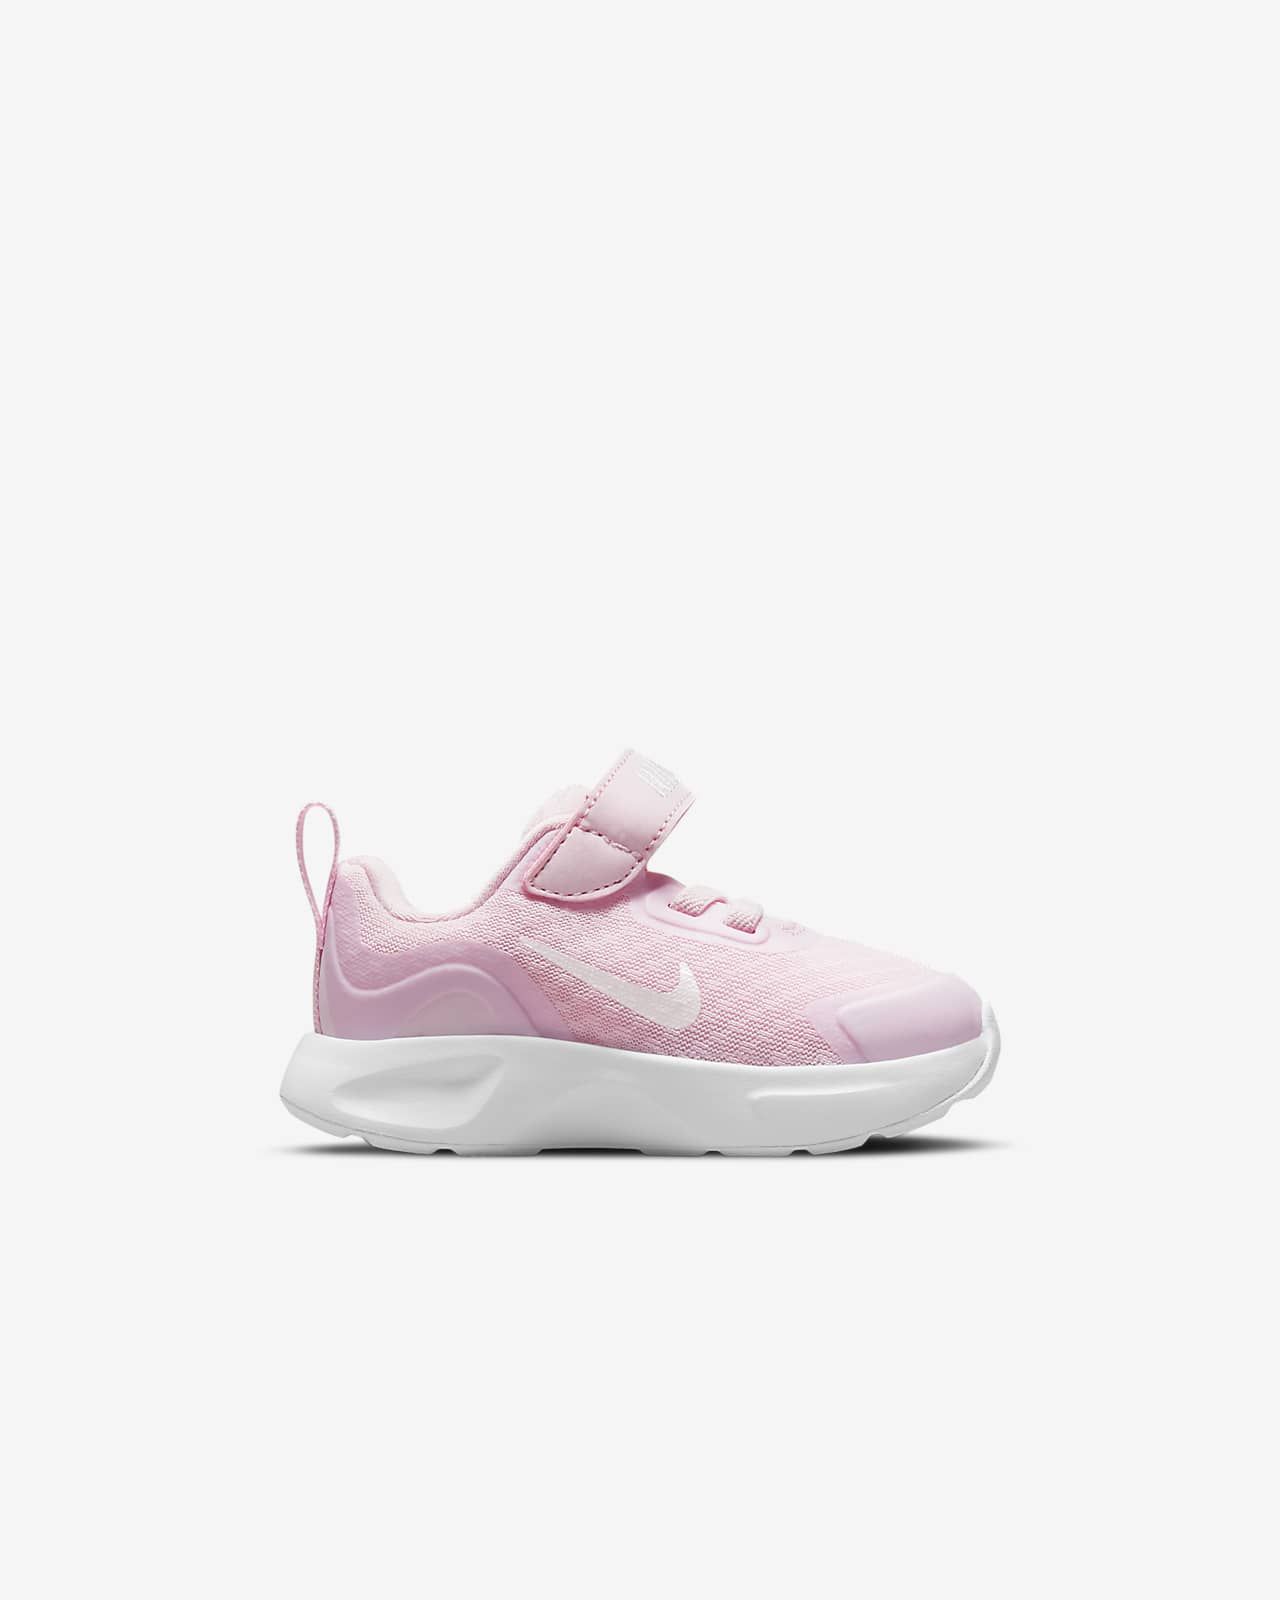 Nike WearAllDay Baby/Toddler Shoes. Nike.com | Nike (US)